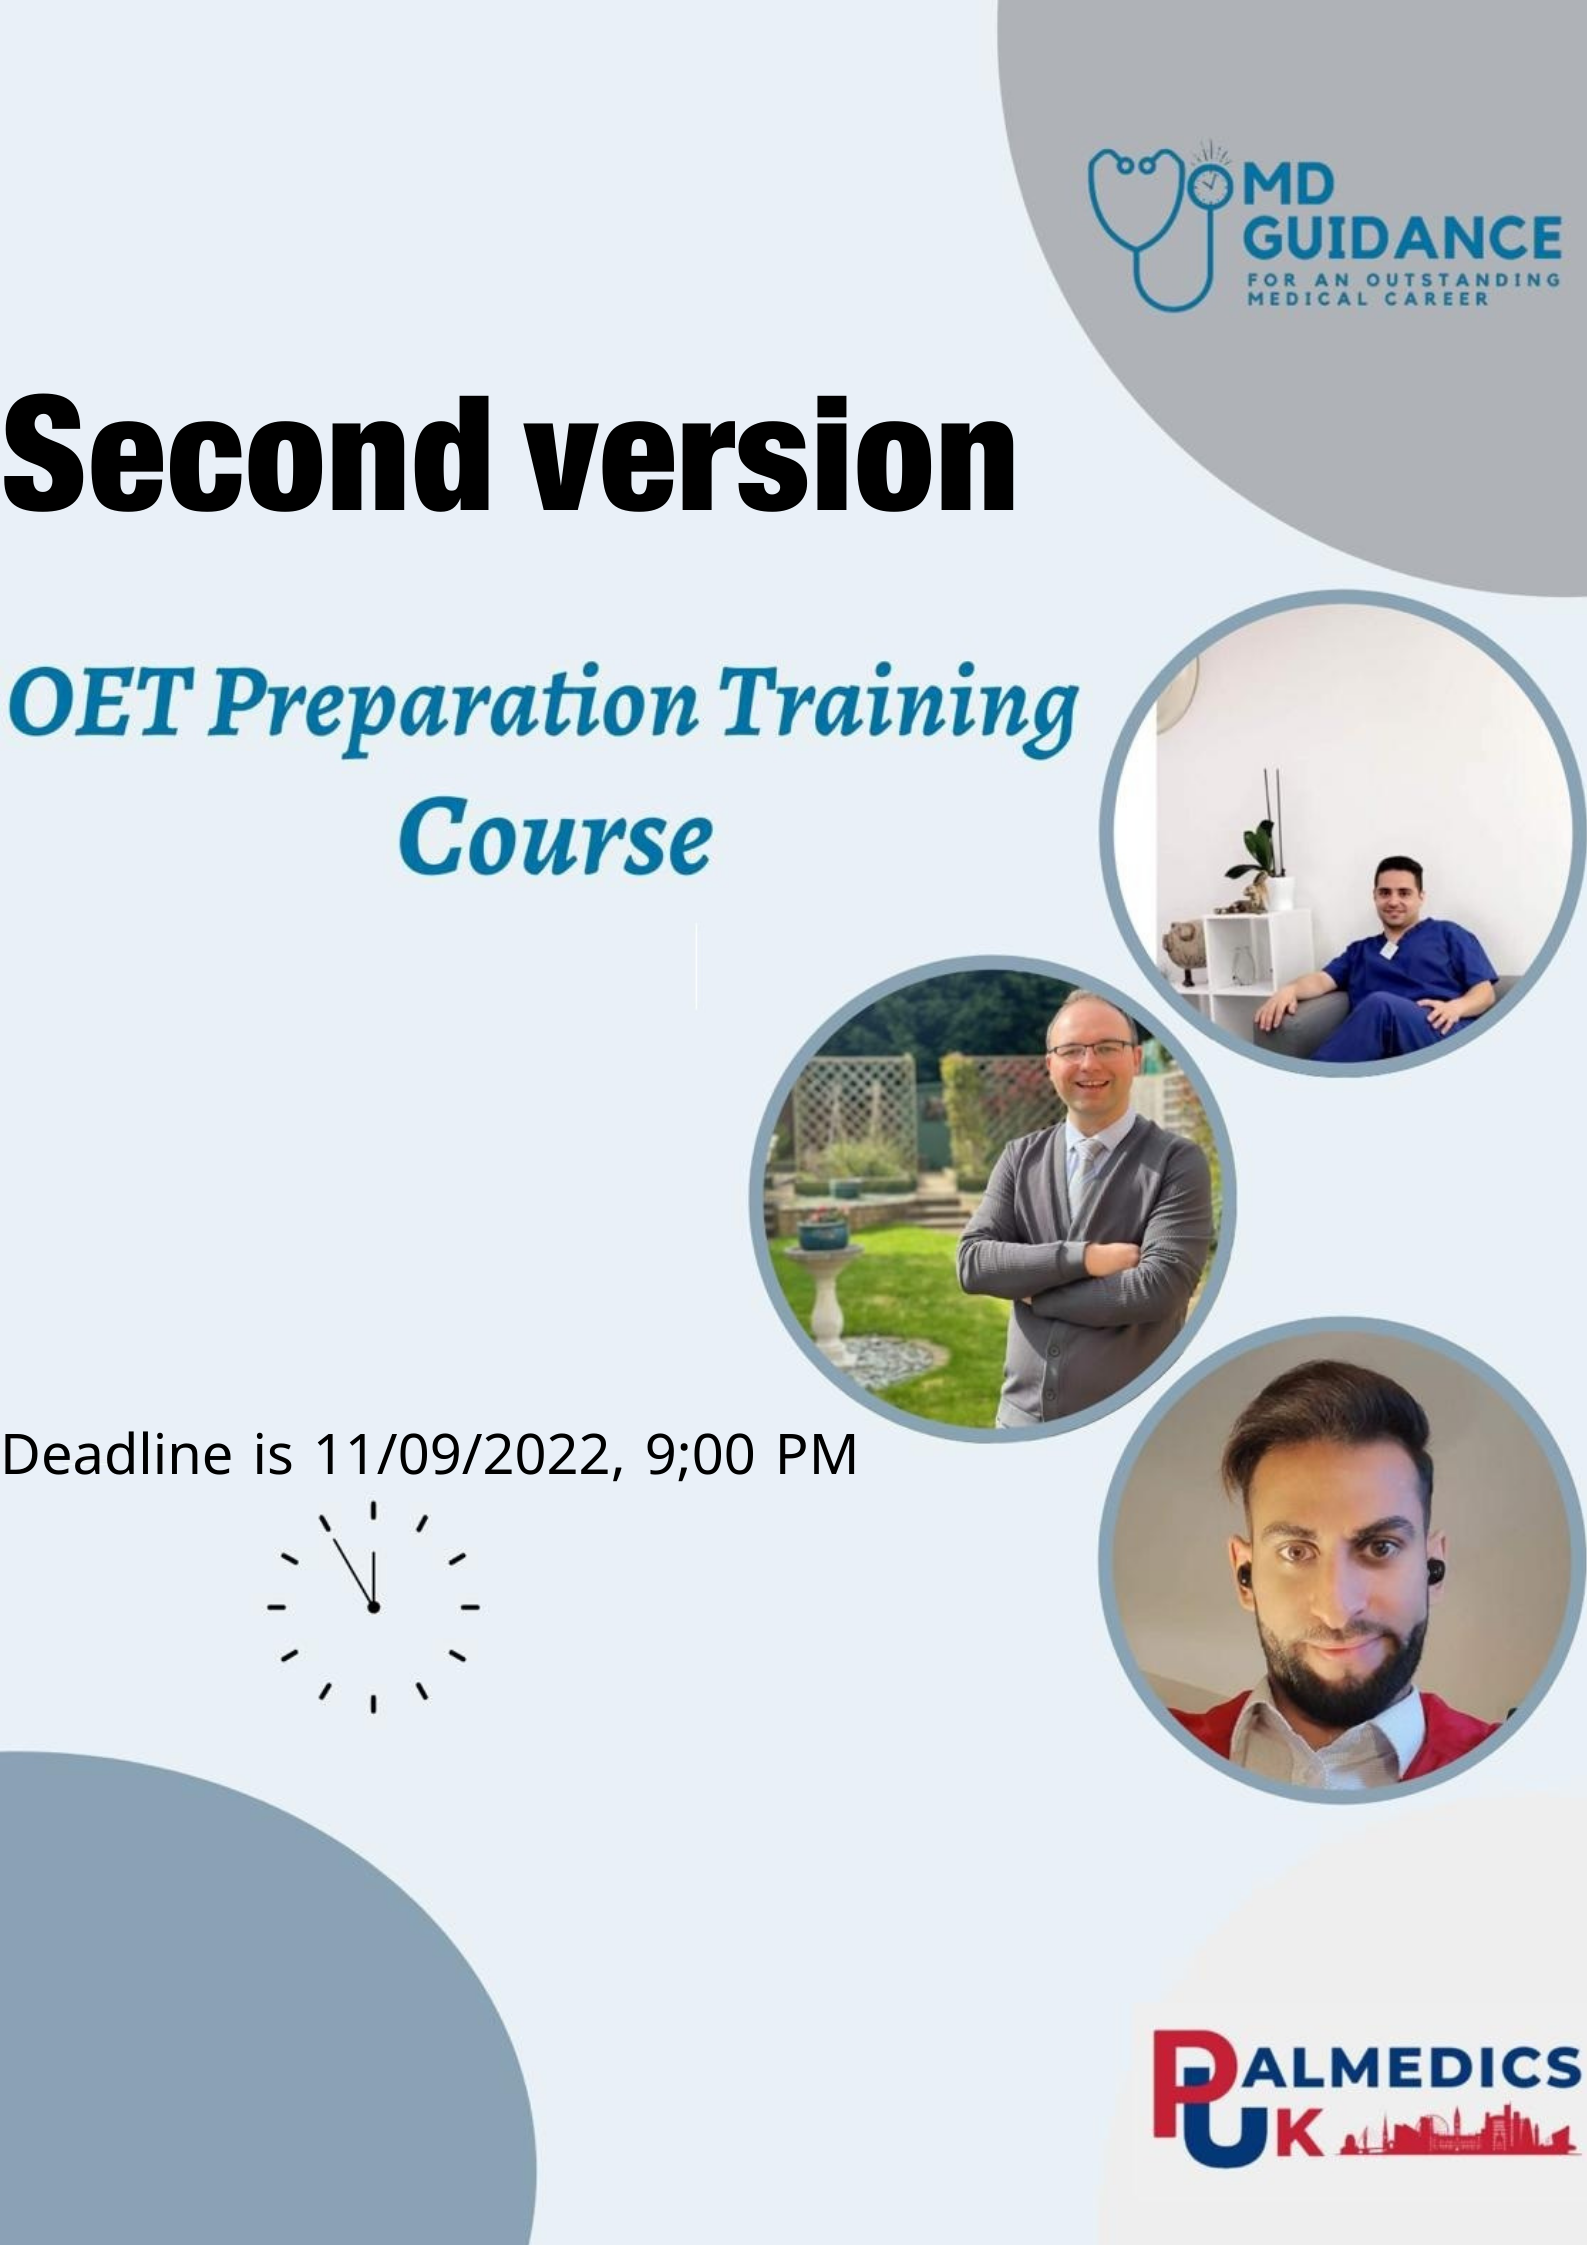 OET Preparation Training Course